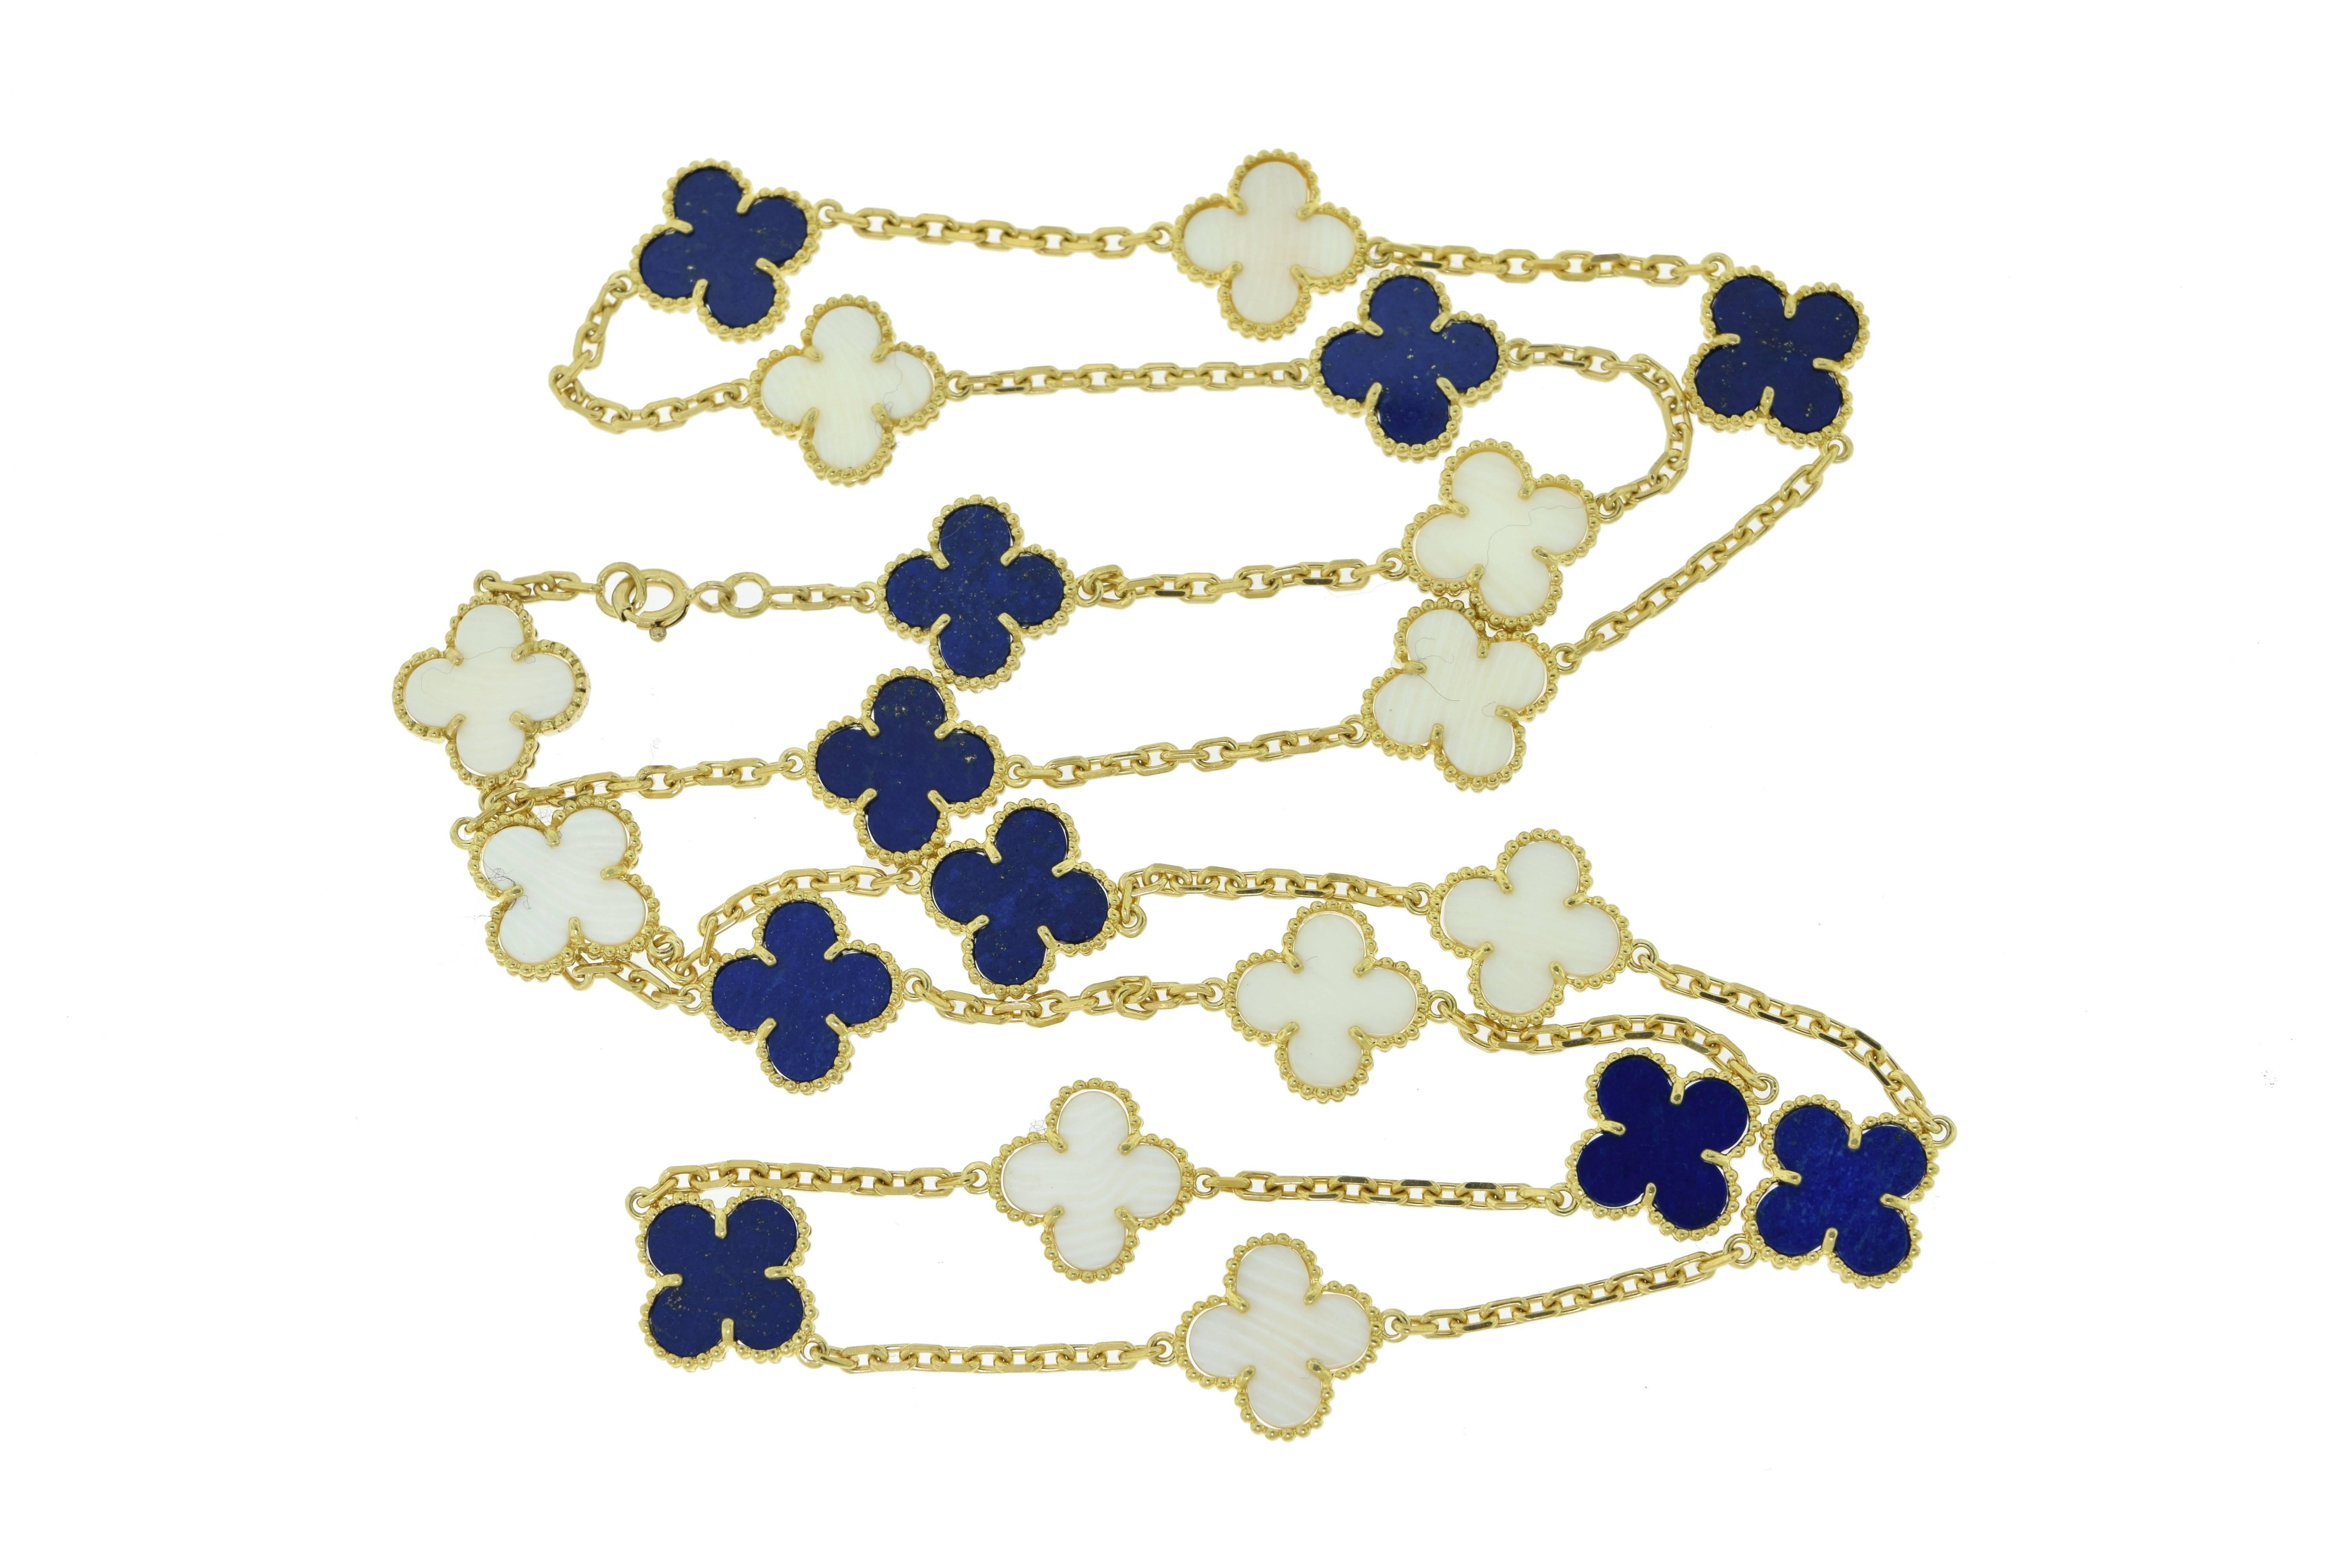 Designer: Van Cleef & Arpels
Collection: Alhambra
Stones: Lapis Lazuli, White Coral
Metal: Yellow Gold
Metal Purity: 18k
Total Item Weight (grams): 43.2
Length: 32 inches